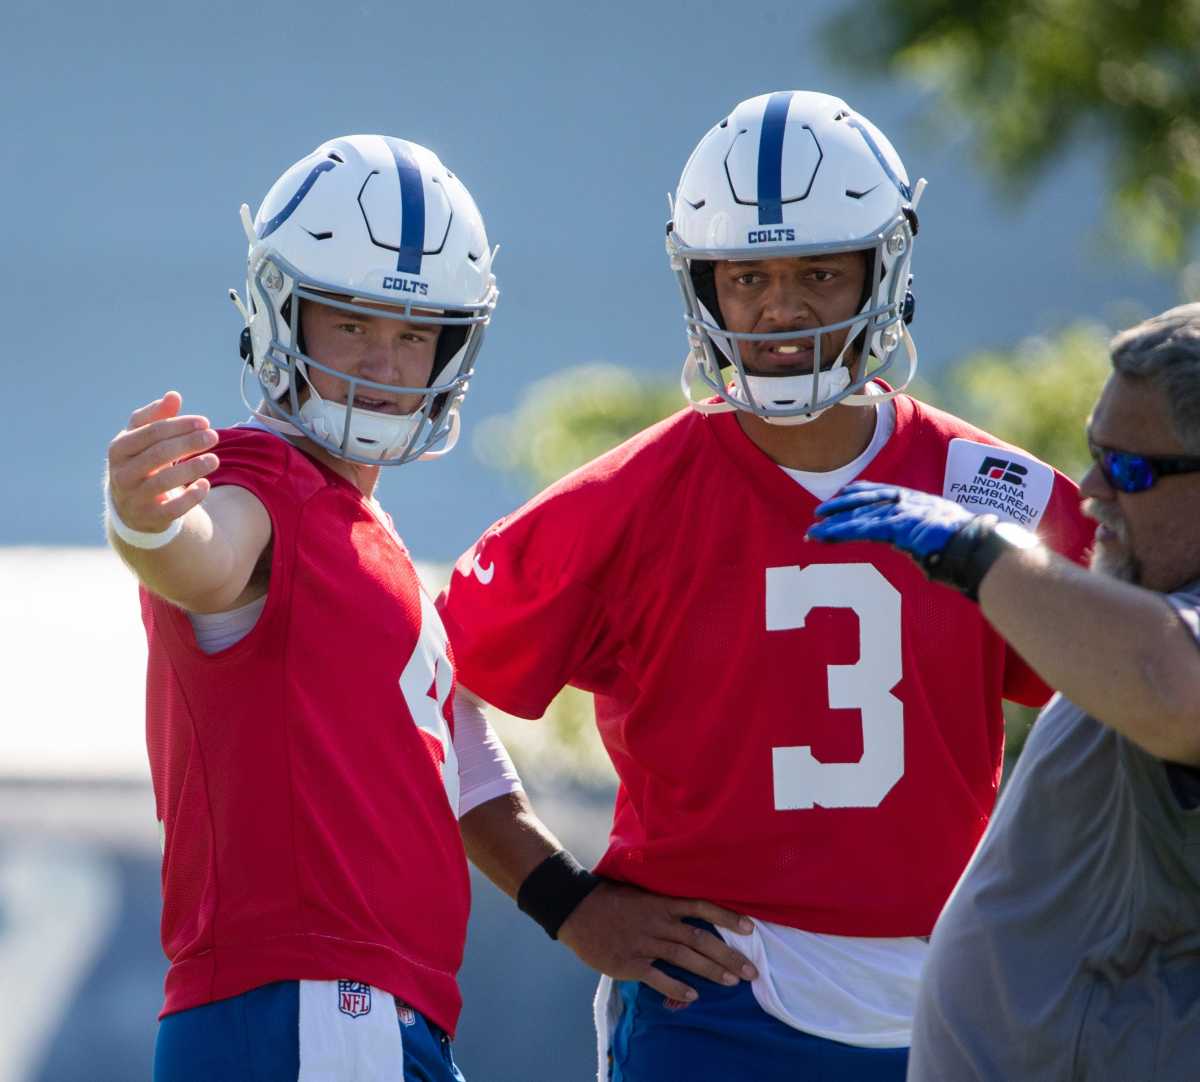 Indianapolis Colts quarterback Sam Ehlinger (4) and Indianapolis Colts quarterback Brett Hundley (3) talk things over at Grand Park in Westfield on Monday, August 2, 2021, on the second week of workouts of this summer's Colts training camp. Head Coach Frank Reich reappeared at practice after being away for ten days after a COVID-19 positive test. Colts Get Their Coach Back On Week Two Of Colts Camp